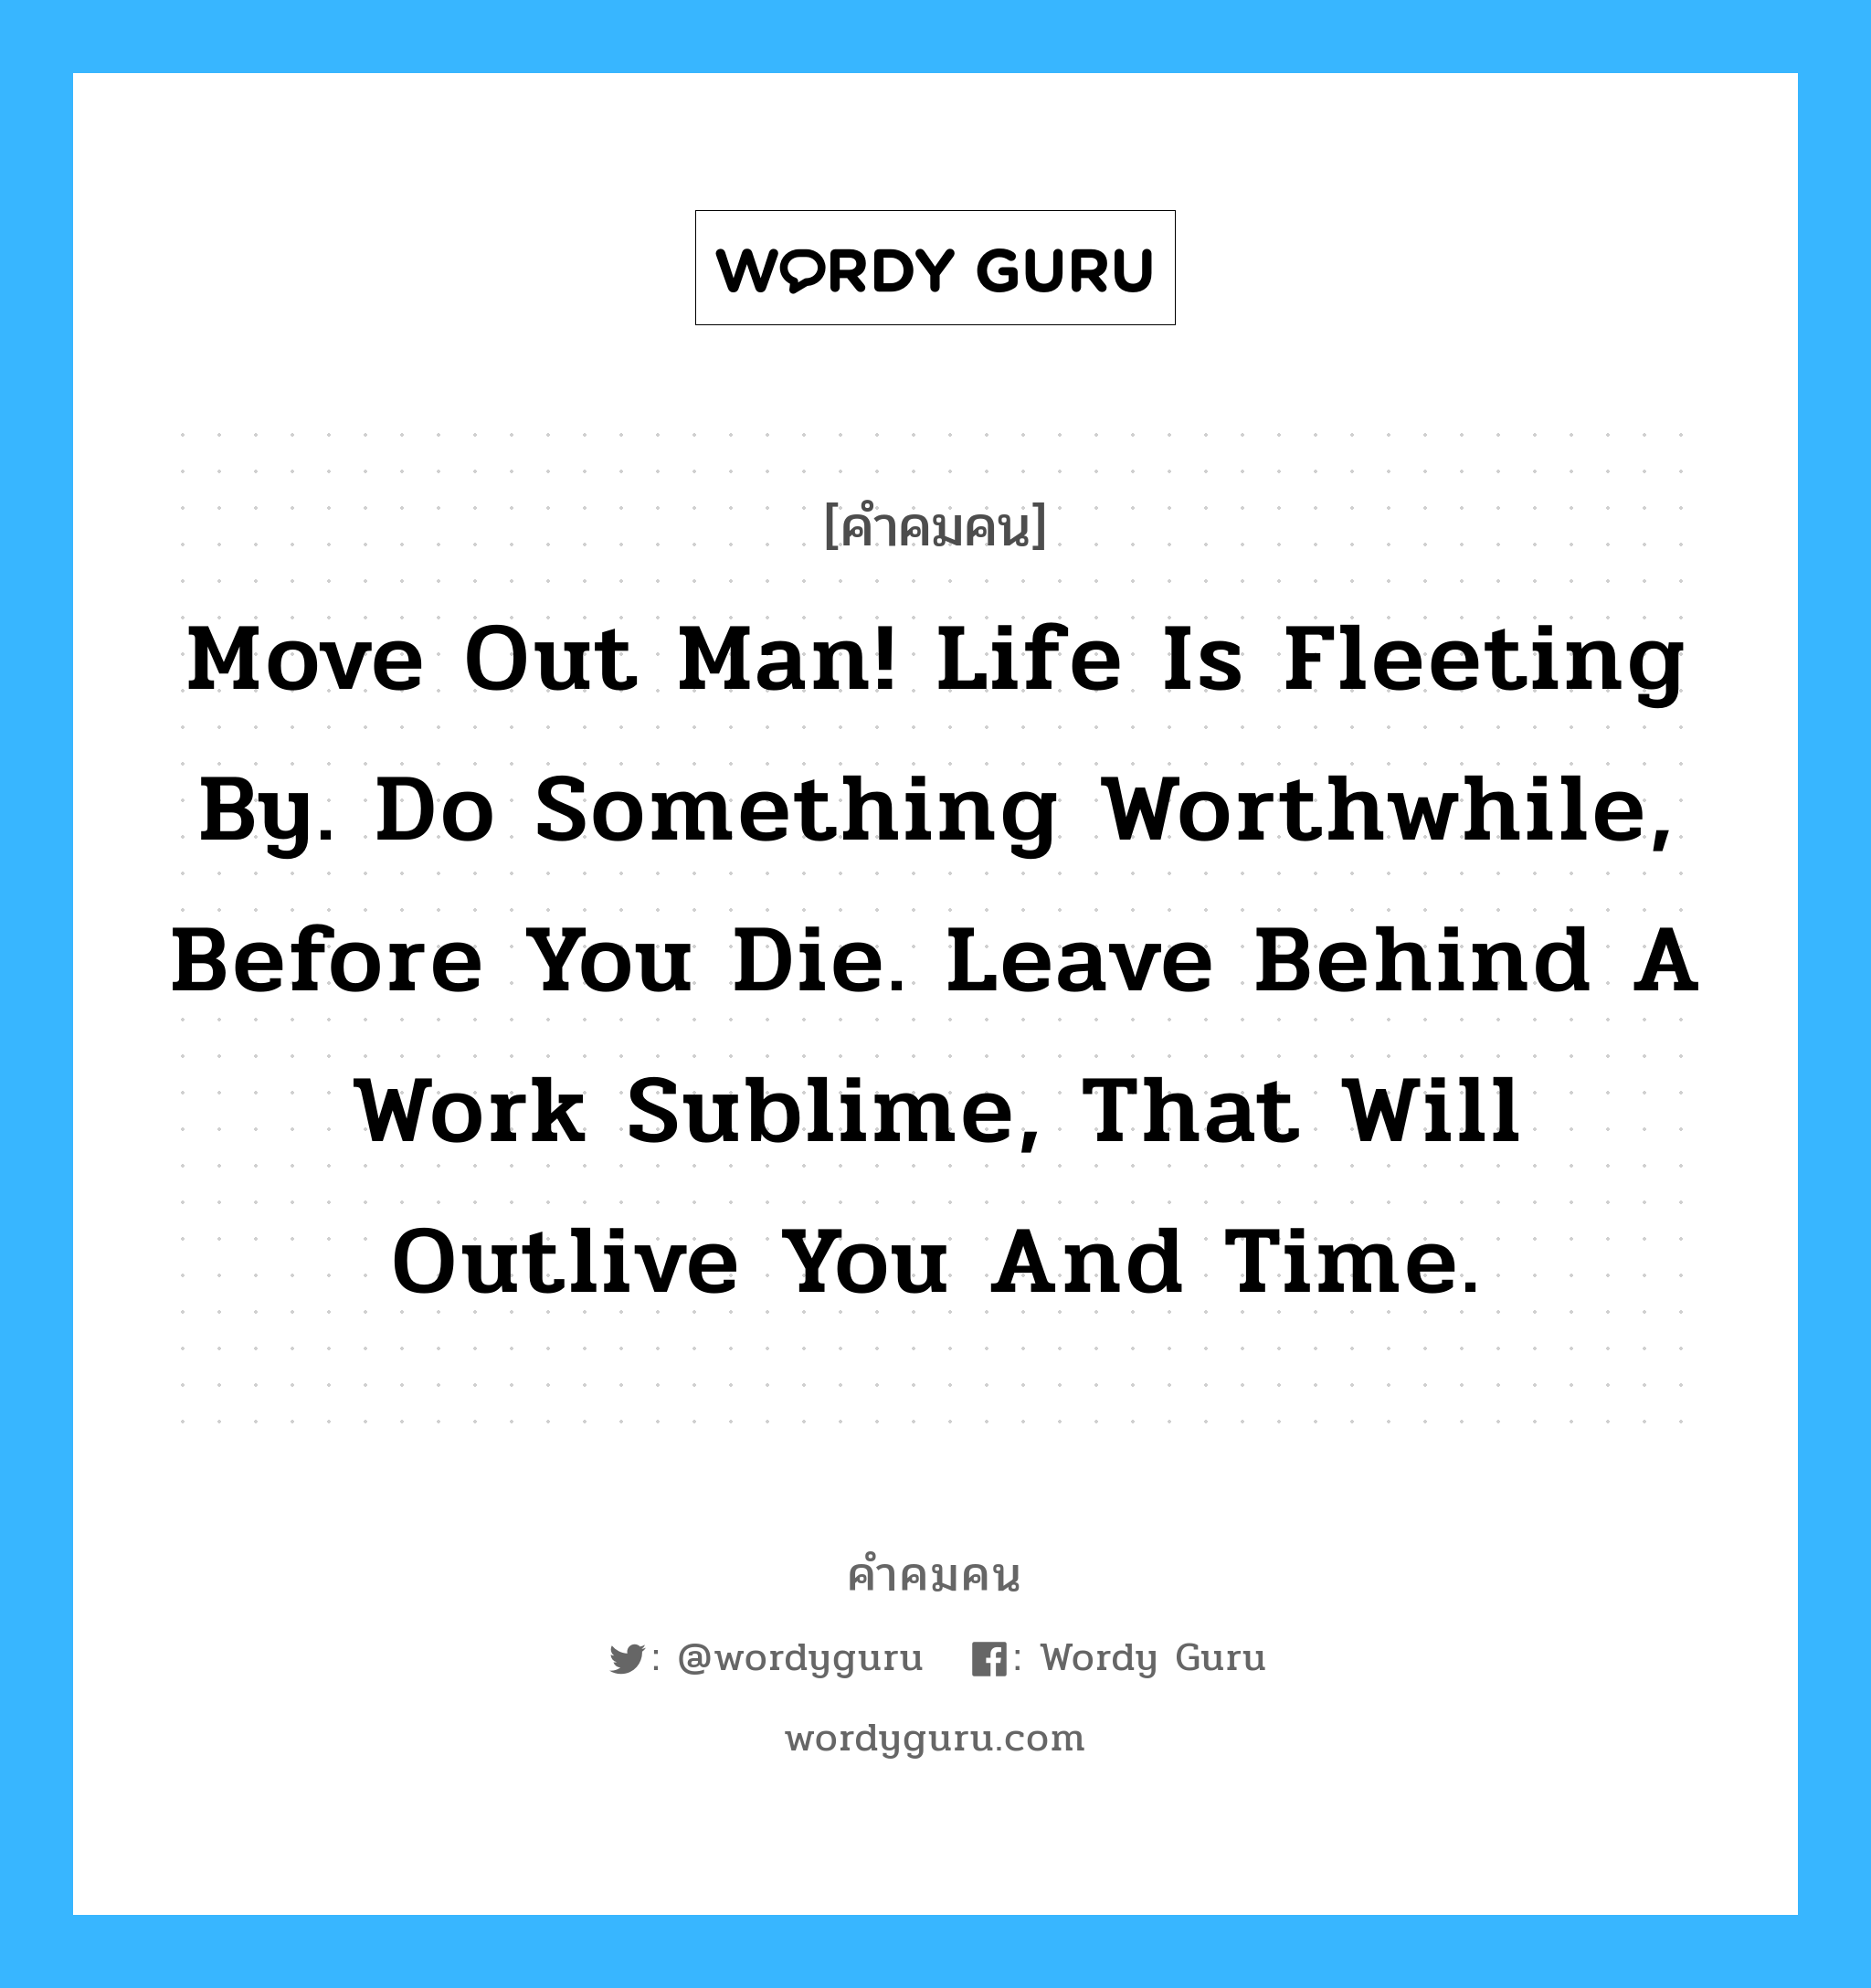 Move out man! Life is fleeting by. Do something worthwhile, before you die. Leave behind a work sublime, that will outlive you and time., คำคมคน Move out man! Life is fleeting by. Do something worthwhile, before you die. Leave behind a work sublime, that will outlive you and time. อันชีวิตคนเราช่างสั้นนัก ต้องรู้จักทำประโยชน์ก่อนจะสาย ทิ้งไว้เป็นอนุสรณ์หลังความตาย มีความหมายคงอยู่ ตลอดไป Alfred A. Montepert หมวด Alfred A. Montepert